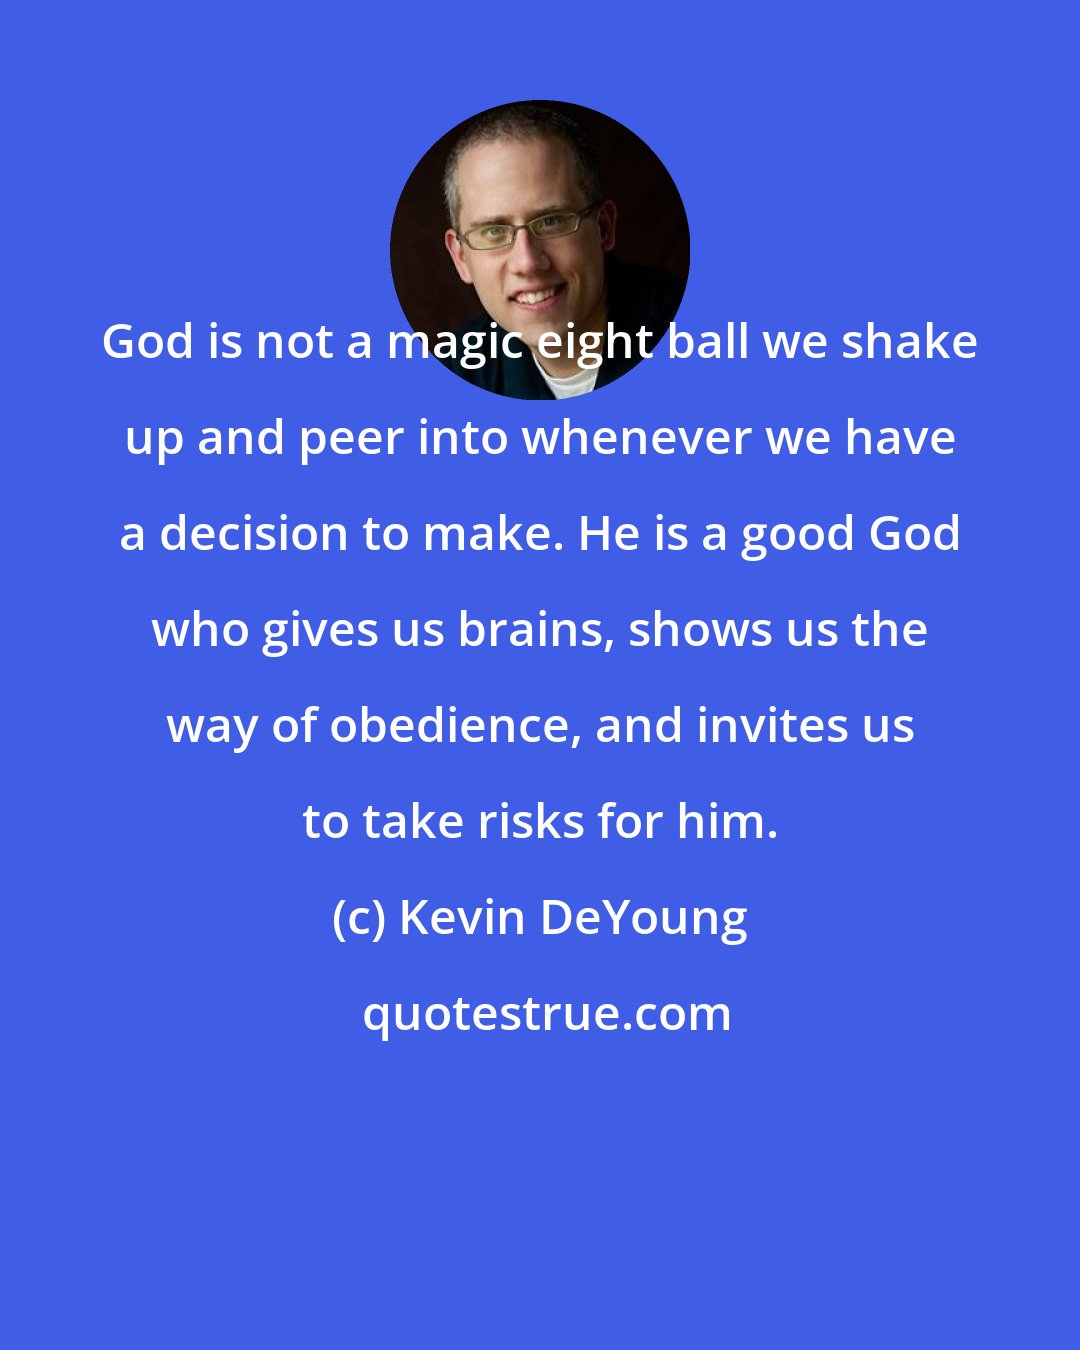 Kevin DeYoung: God is not a magic eight ball we shake up and peer into whenever we have a decision to make. He is a good God who gives us brains, shows us the way of obedience, and invites us to take risks for him.